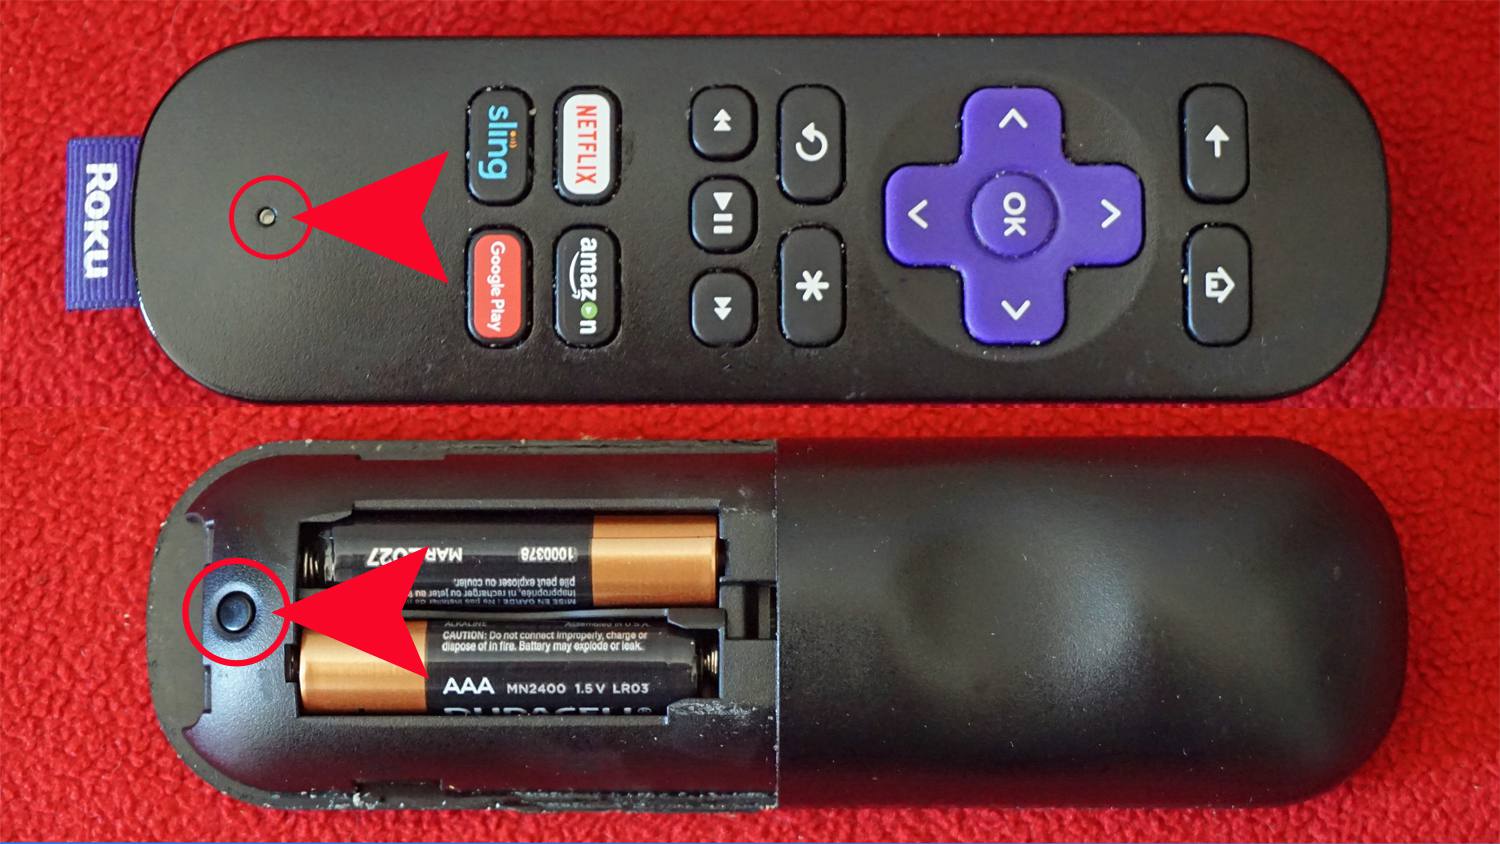 where-is-pairing-button-on-roku-remote